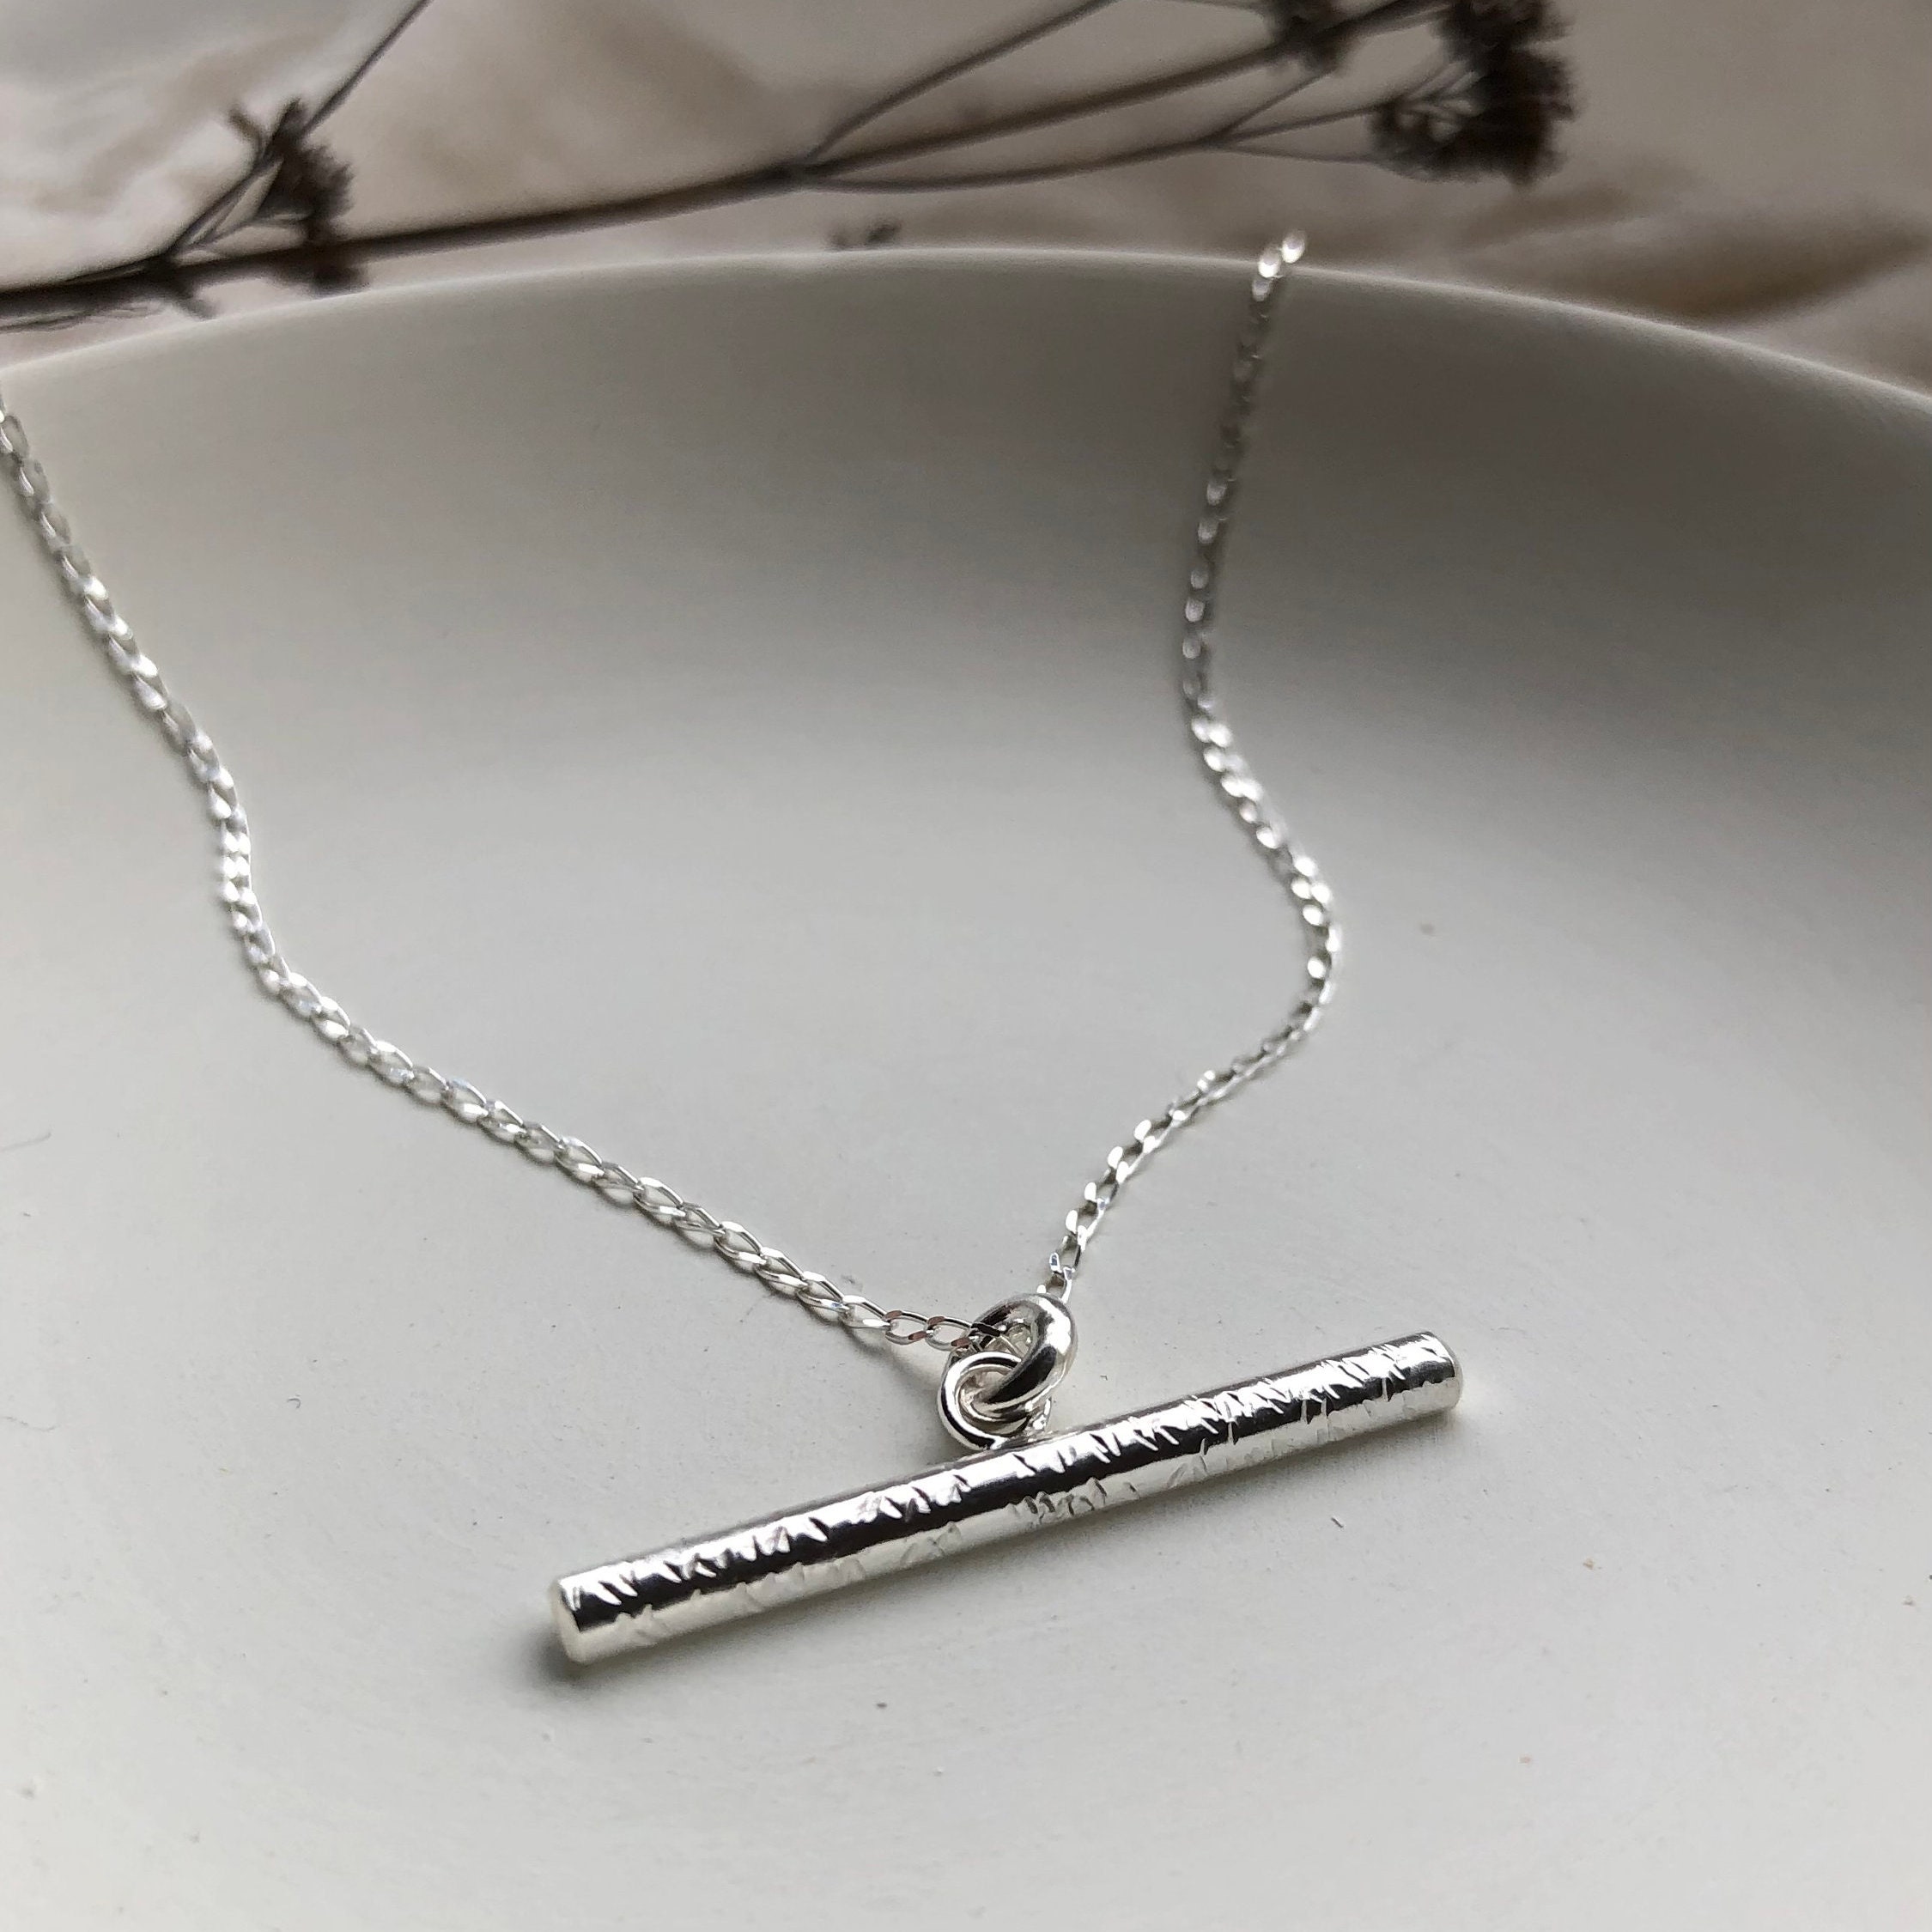 Recycled Silver Bar Necklace, Textured T.bar Pendant Handmade With Recycled Sterling Silver, Minimalist Necklace